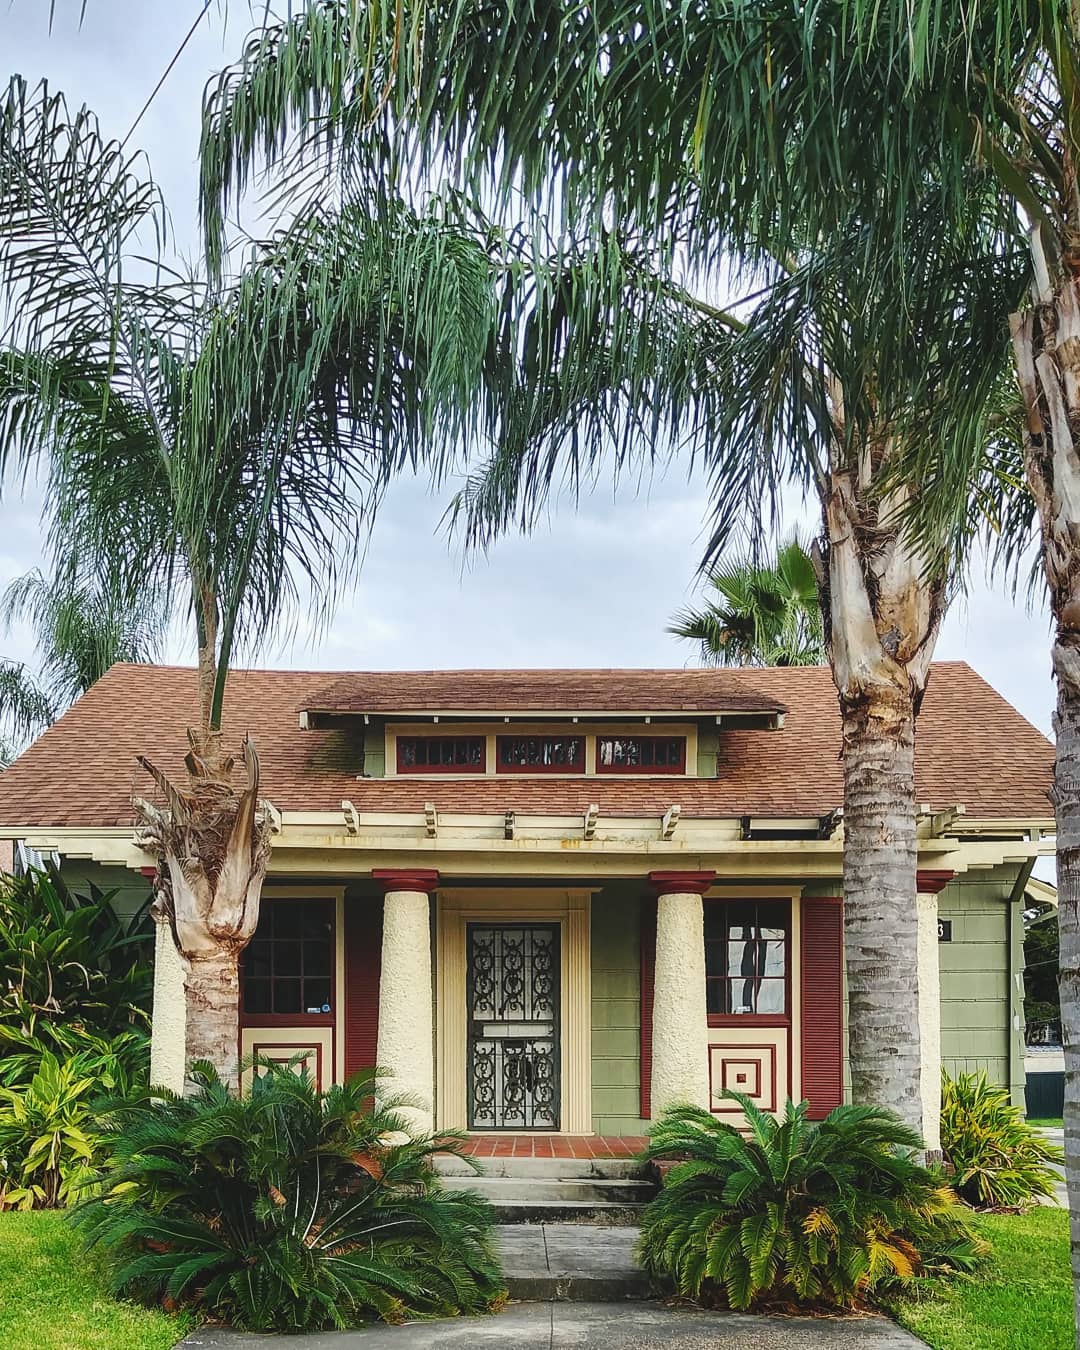 Green bungalow-style home with pillars and palm trees in Fillmore neighborhood. Photo by Instagram user @m.dallemolle